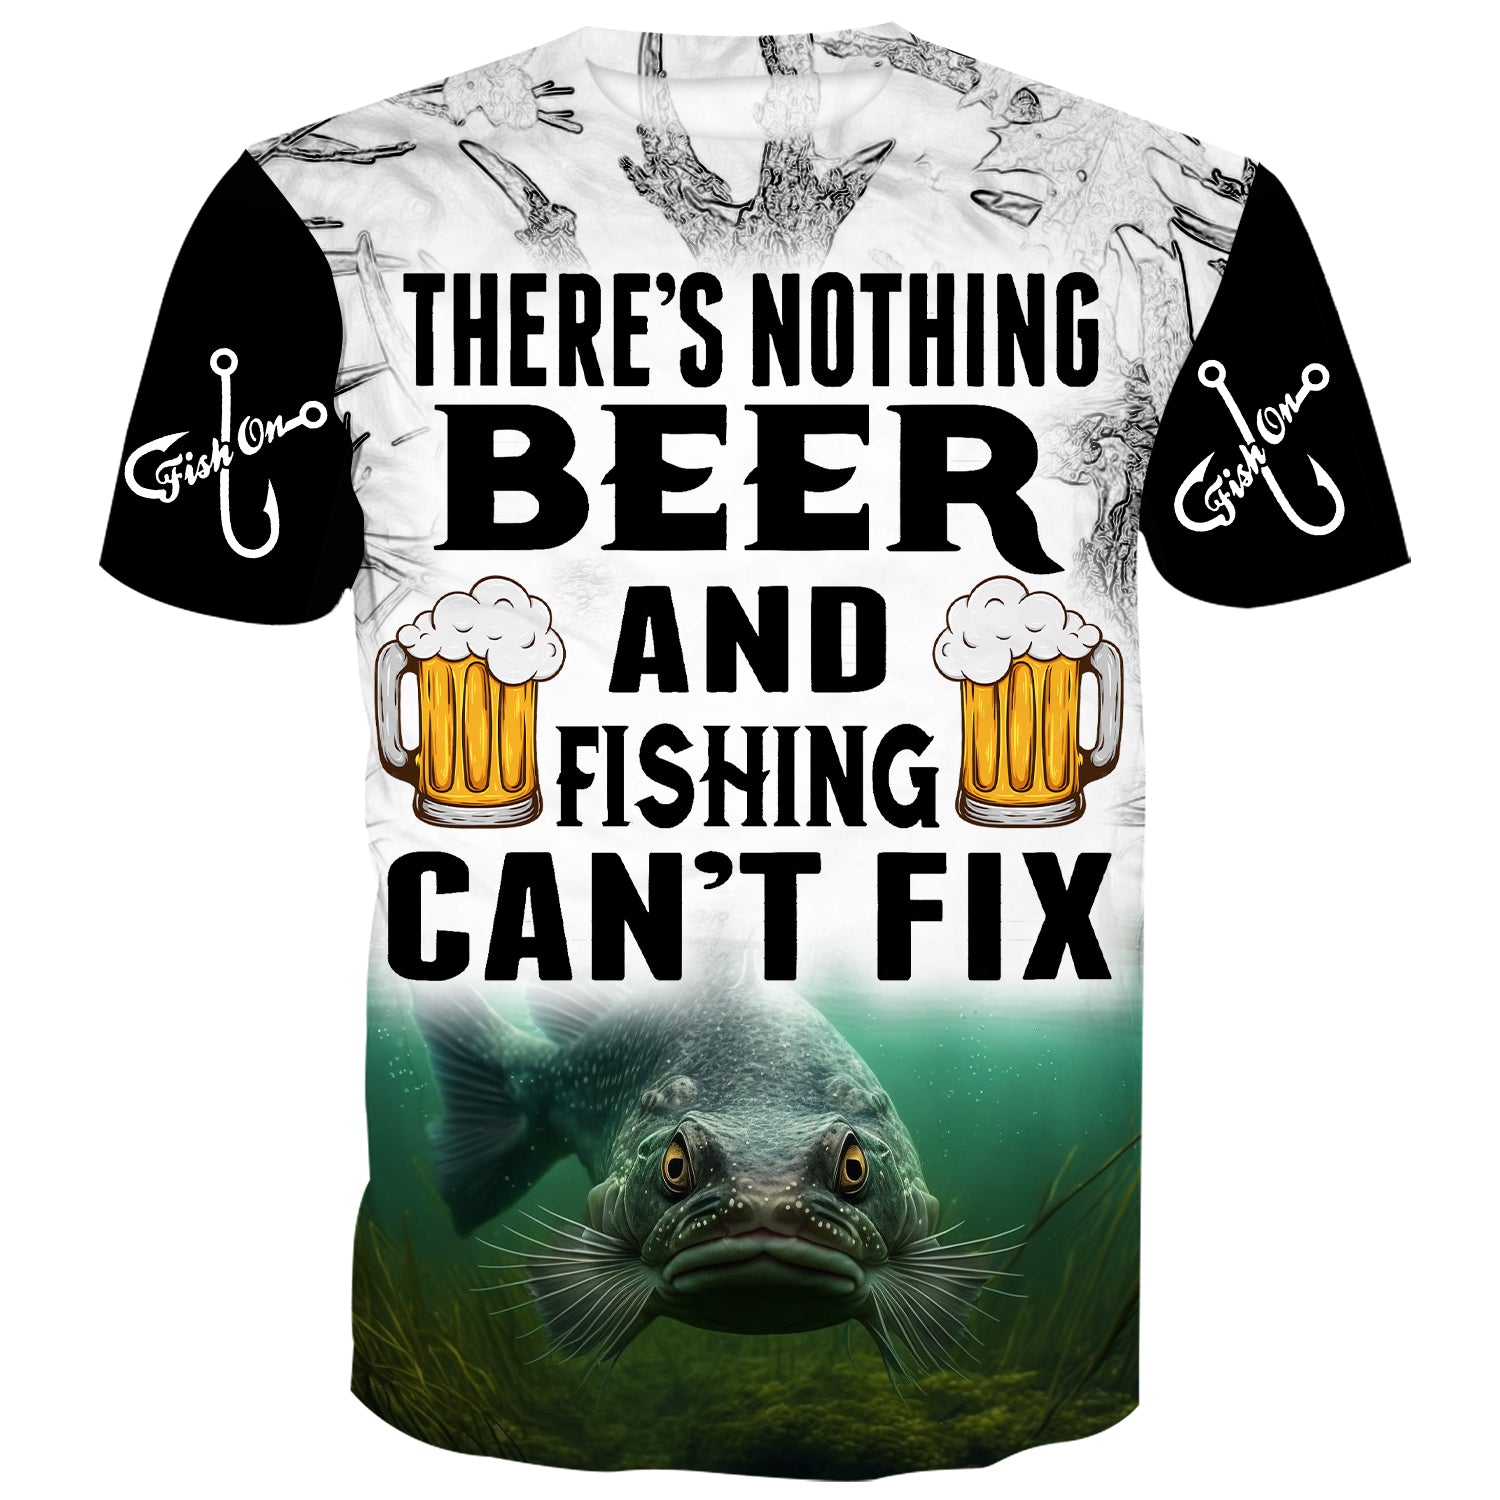 There's nothing beer and fishing can't fix - Catfish T-Shirt